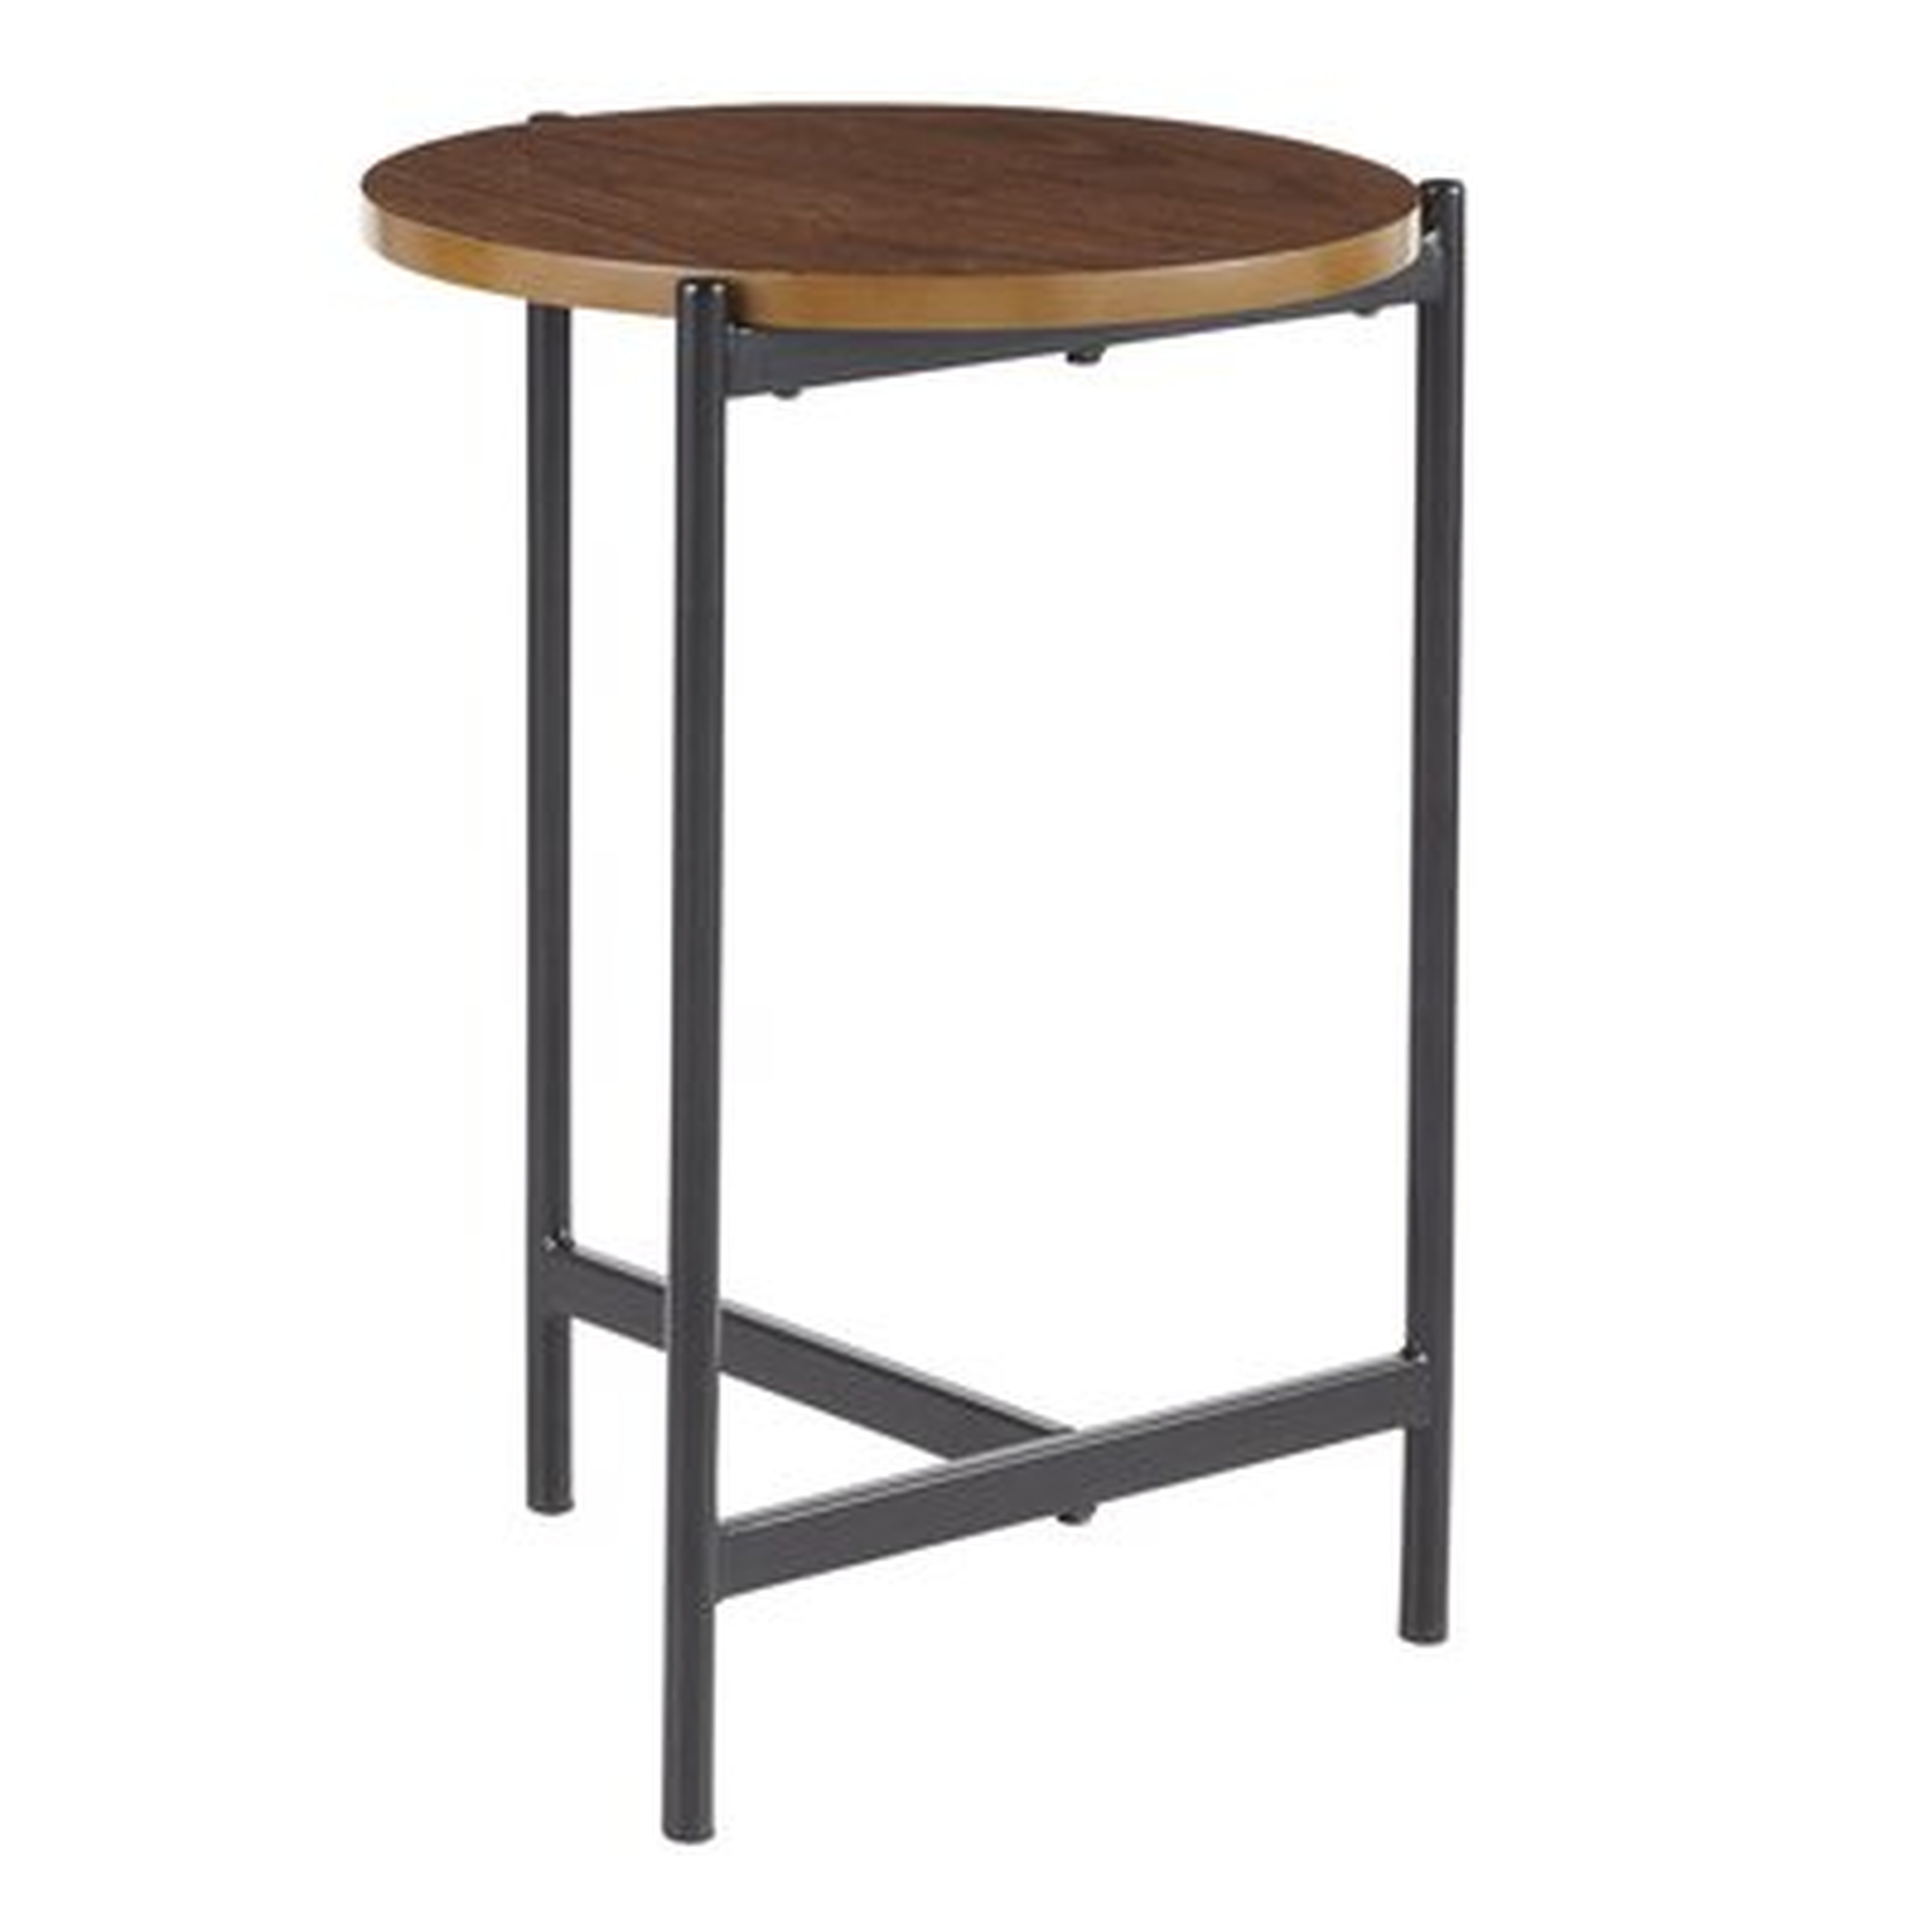 Ealing Contemporary Side Table in Chrome with Black Glass, Walnut Wood - Wayfair